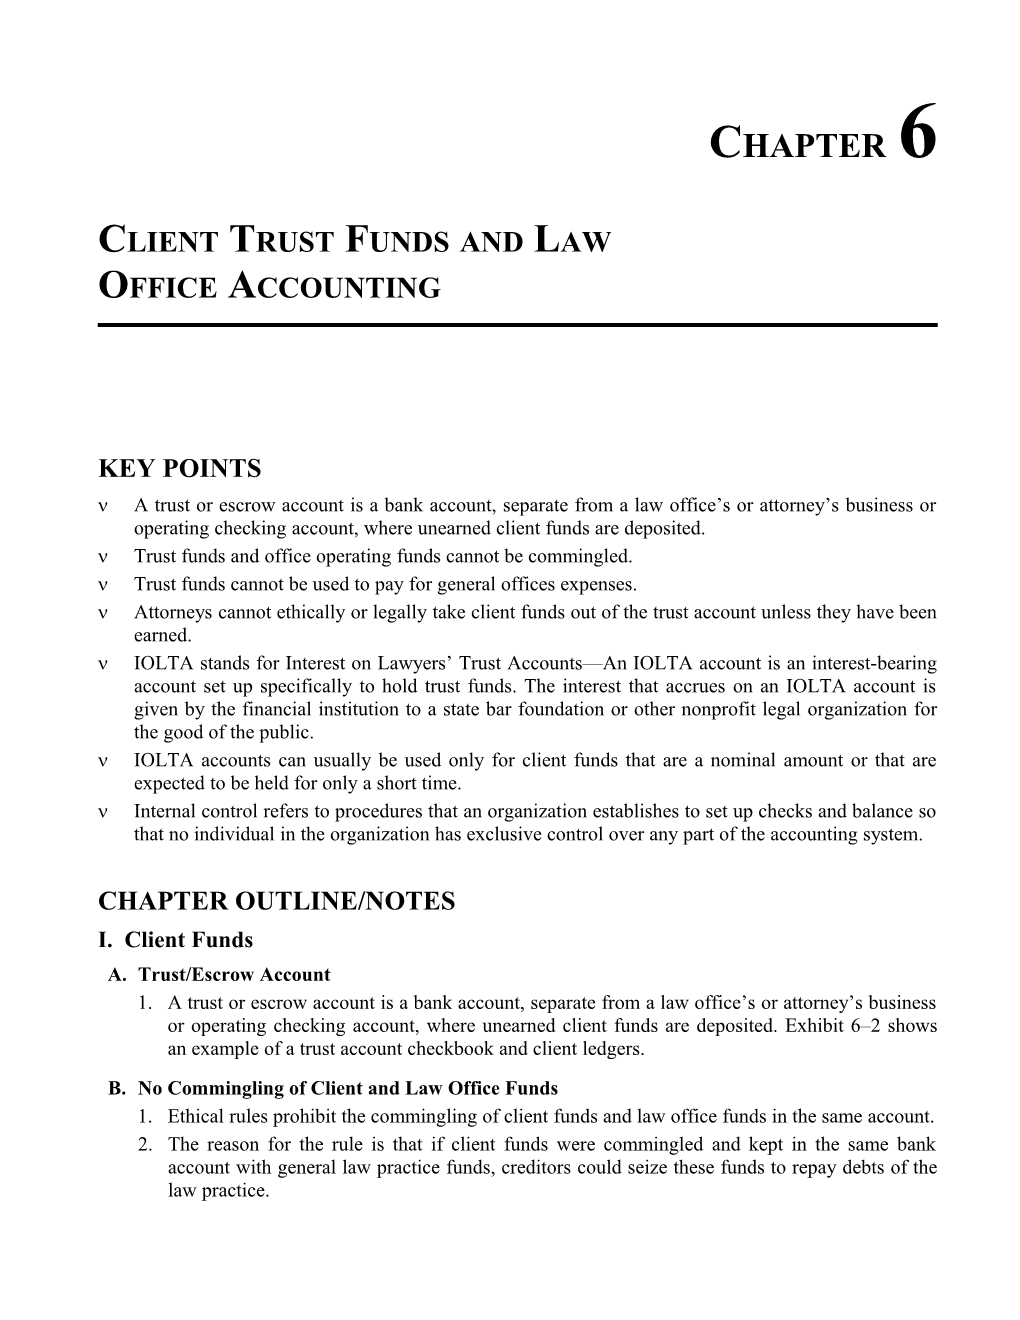 Client Trust Funds and Law Office Accounting